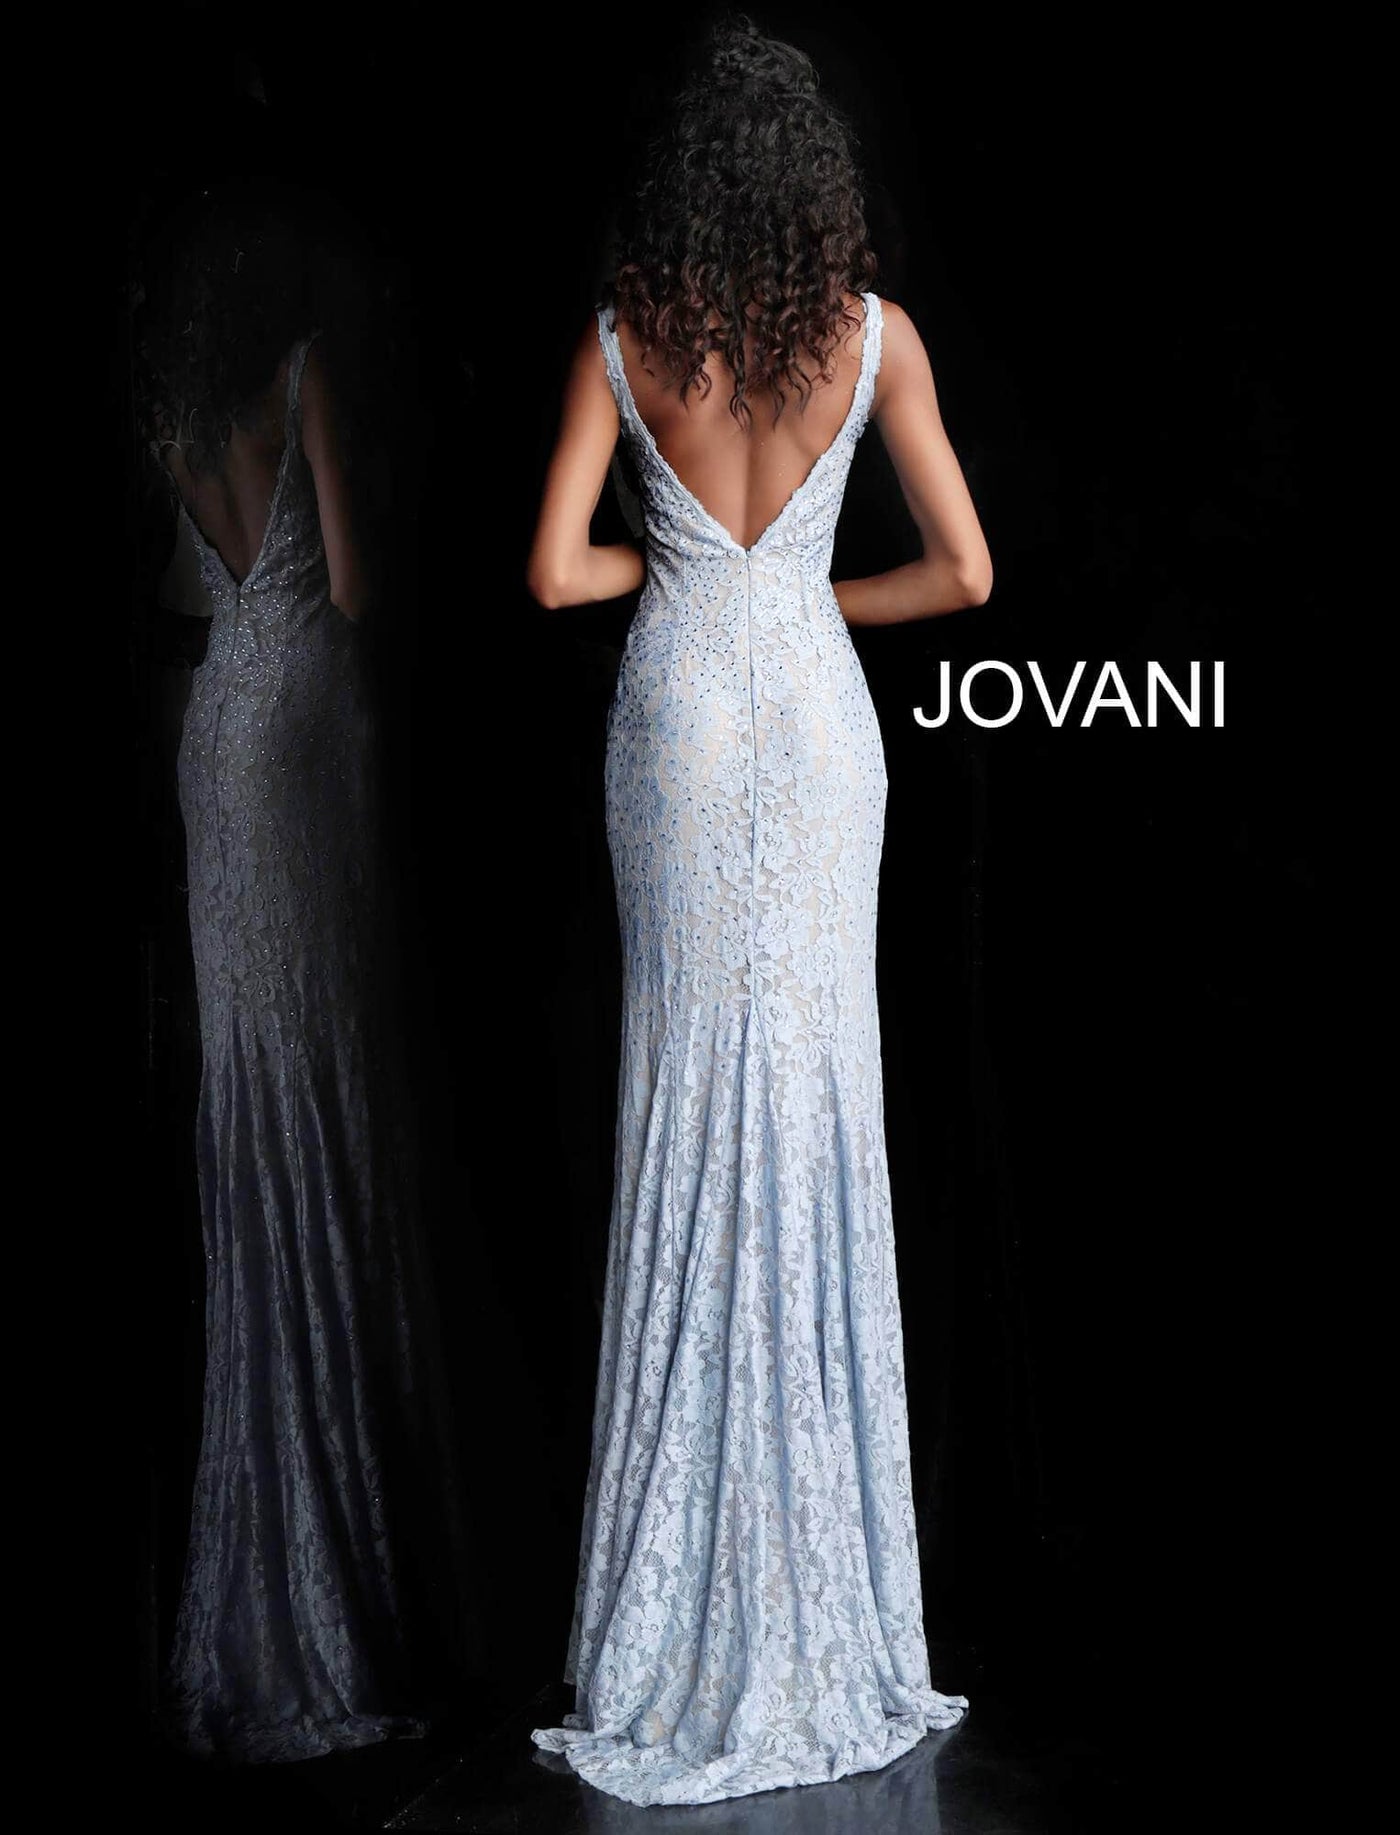 Jovani - Fitted Lace Prom Dress 48994 Prom Dresses